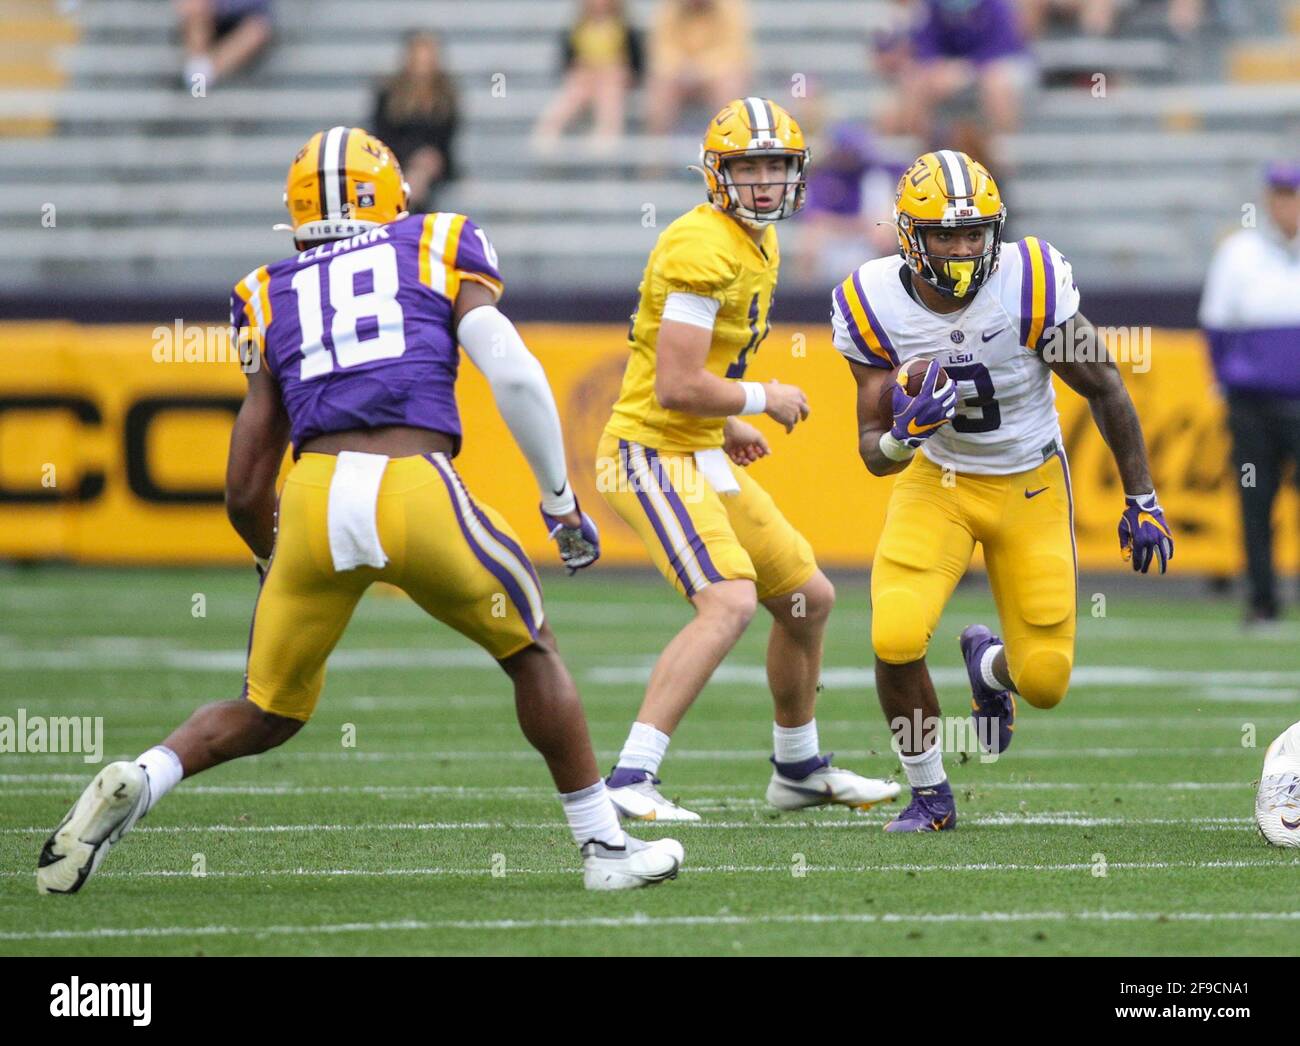 Baton Rouge, LA, USA. 17th Apr, 2021. LSU's Tyrion Davis-Price (3) looks for running room as linebacker Damone Clark (18) looks for a tackle during the National L Club LSU Spring Game at Tiger Stadium in Baton Rouge, LA. Jonathan Mailhes/CSM/Alamy Live News Stock Photo